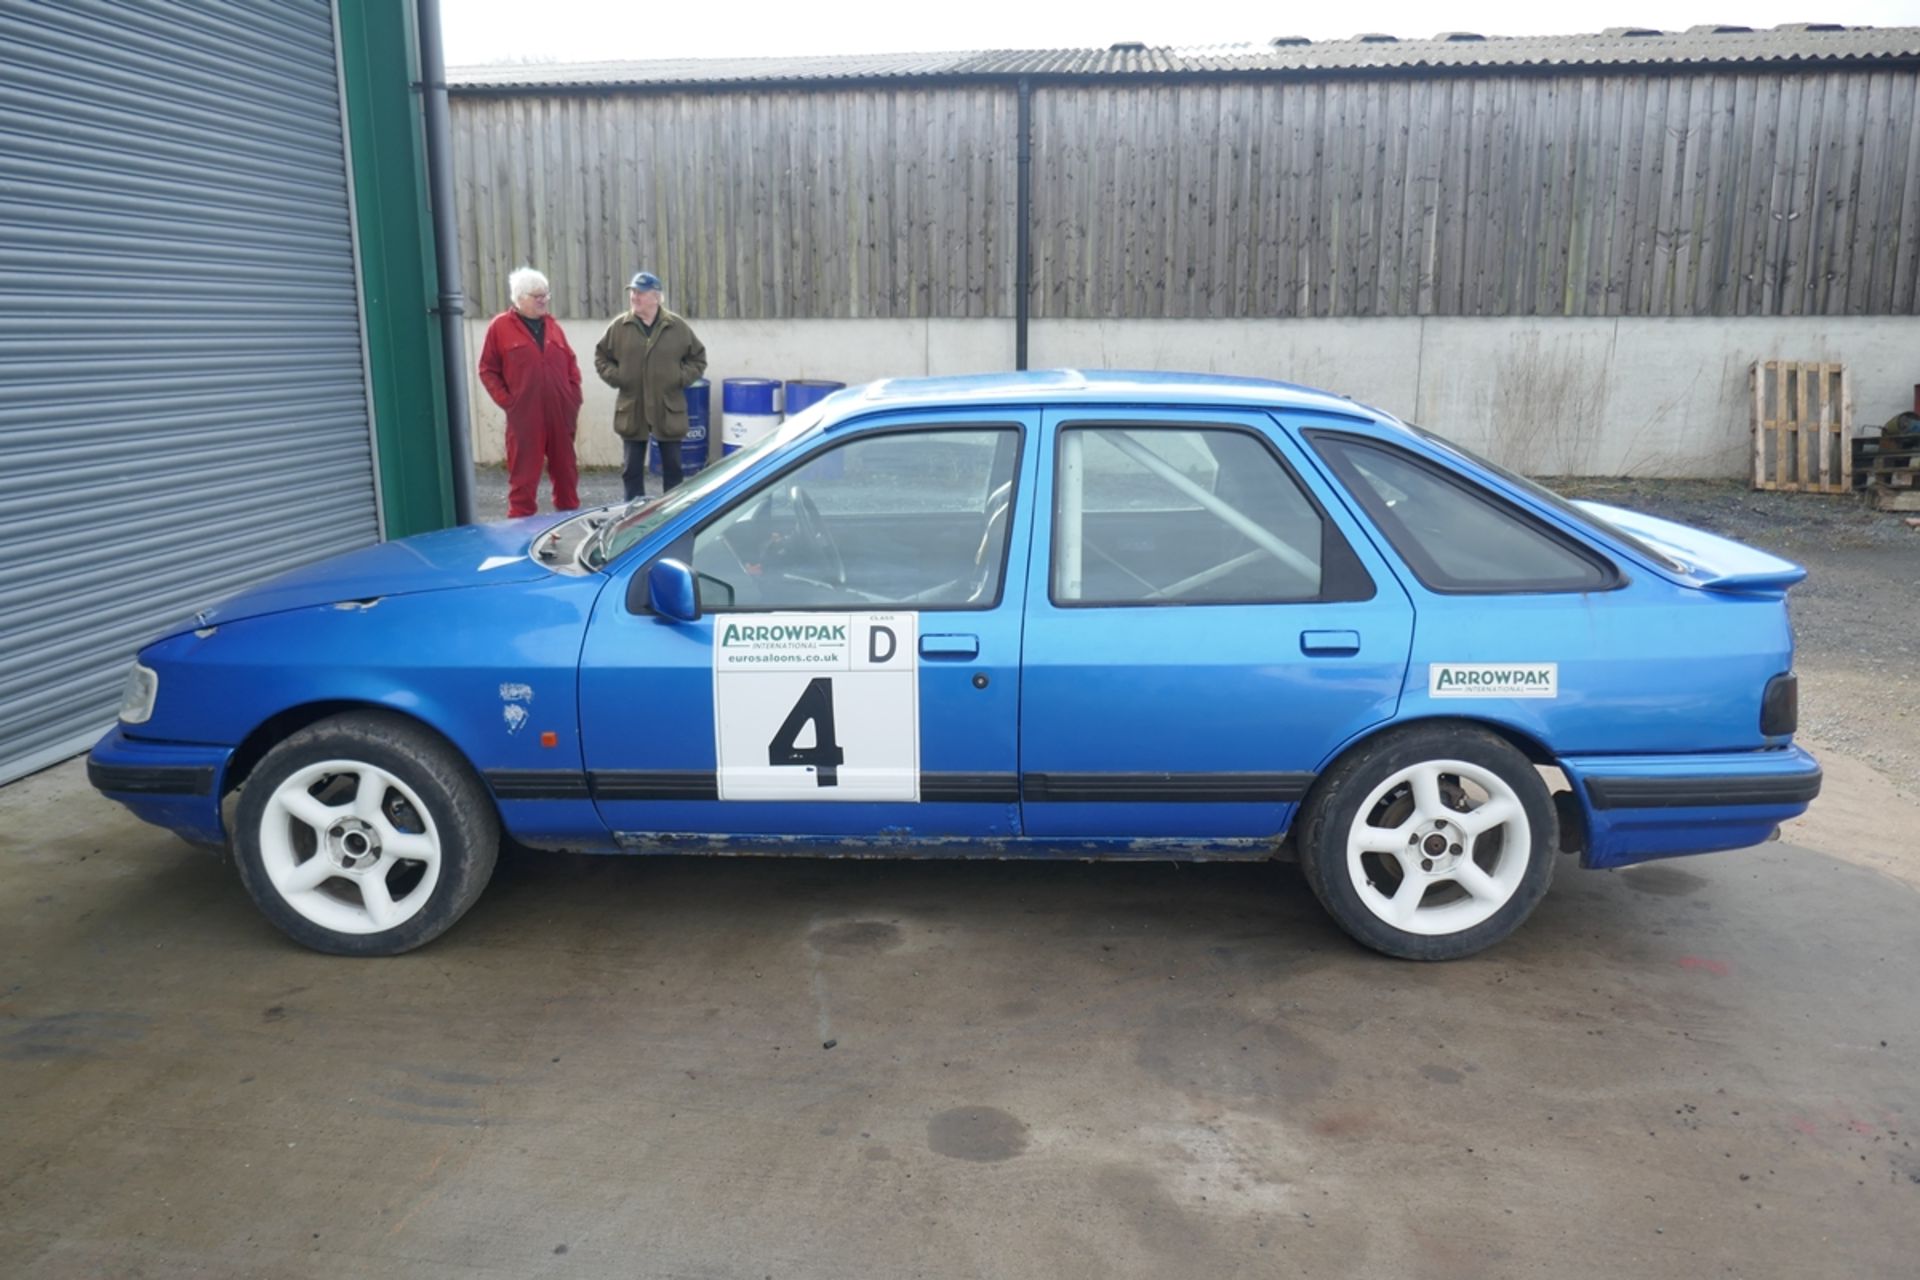 H reg 1990 Ford Sierra 4x4 rally car with V6 Cosworth engine running order with roll cage, fuel cell - Image 6 of 15